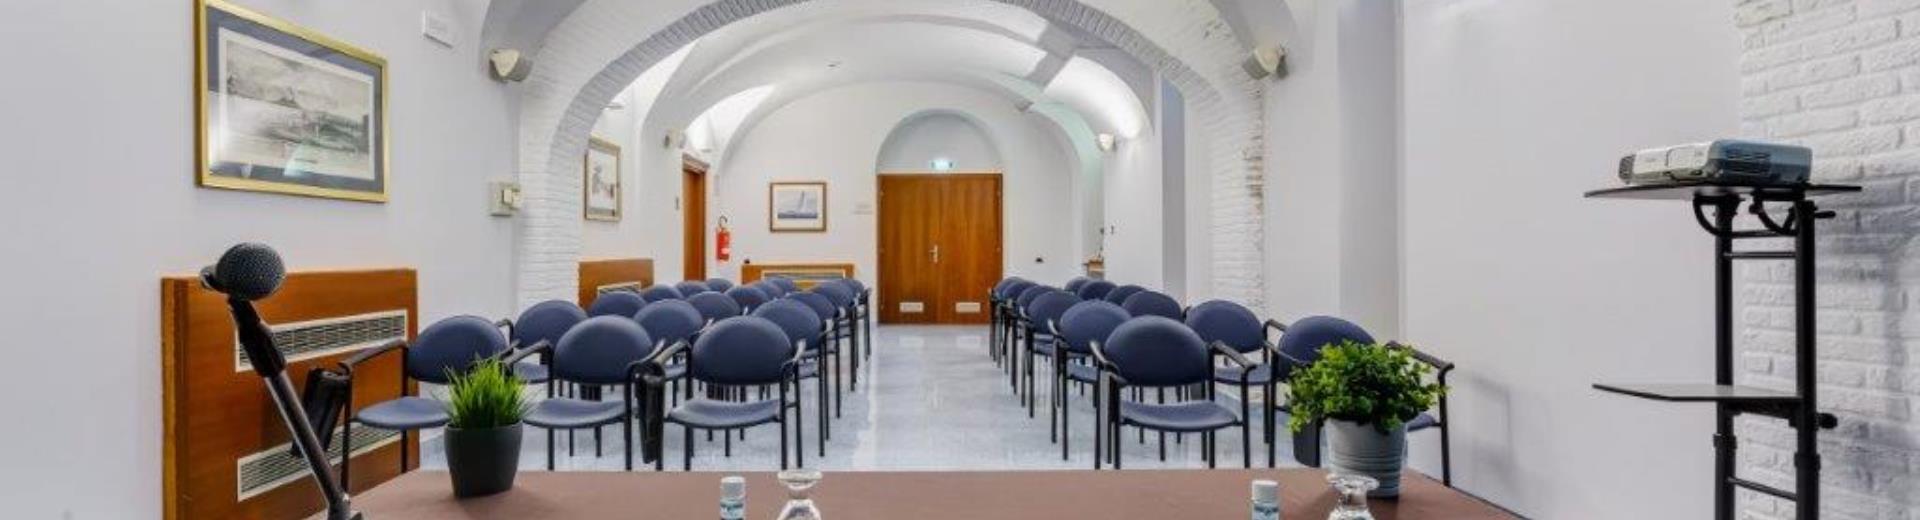 The Principe meeting room can accommodate up to 60 people